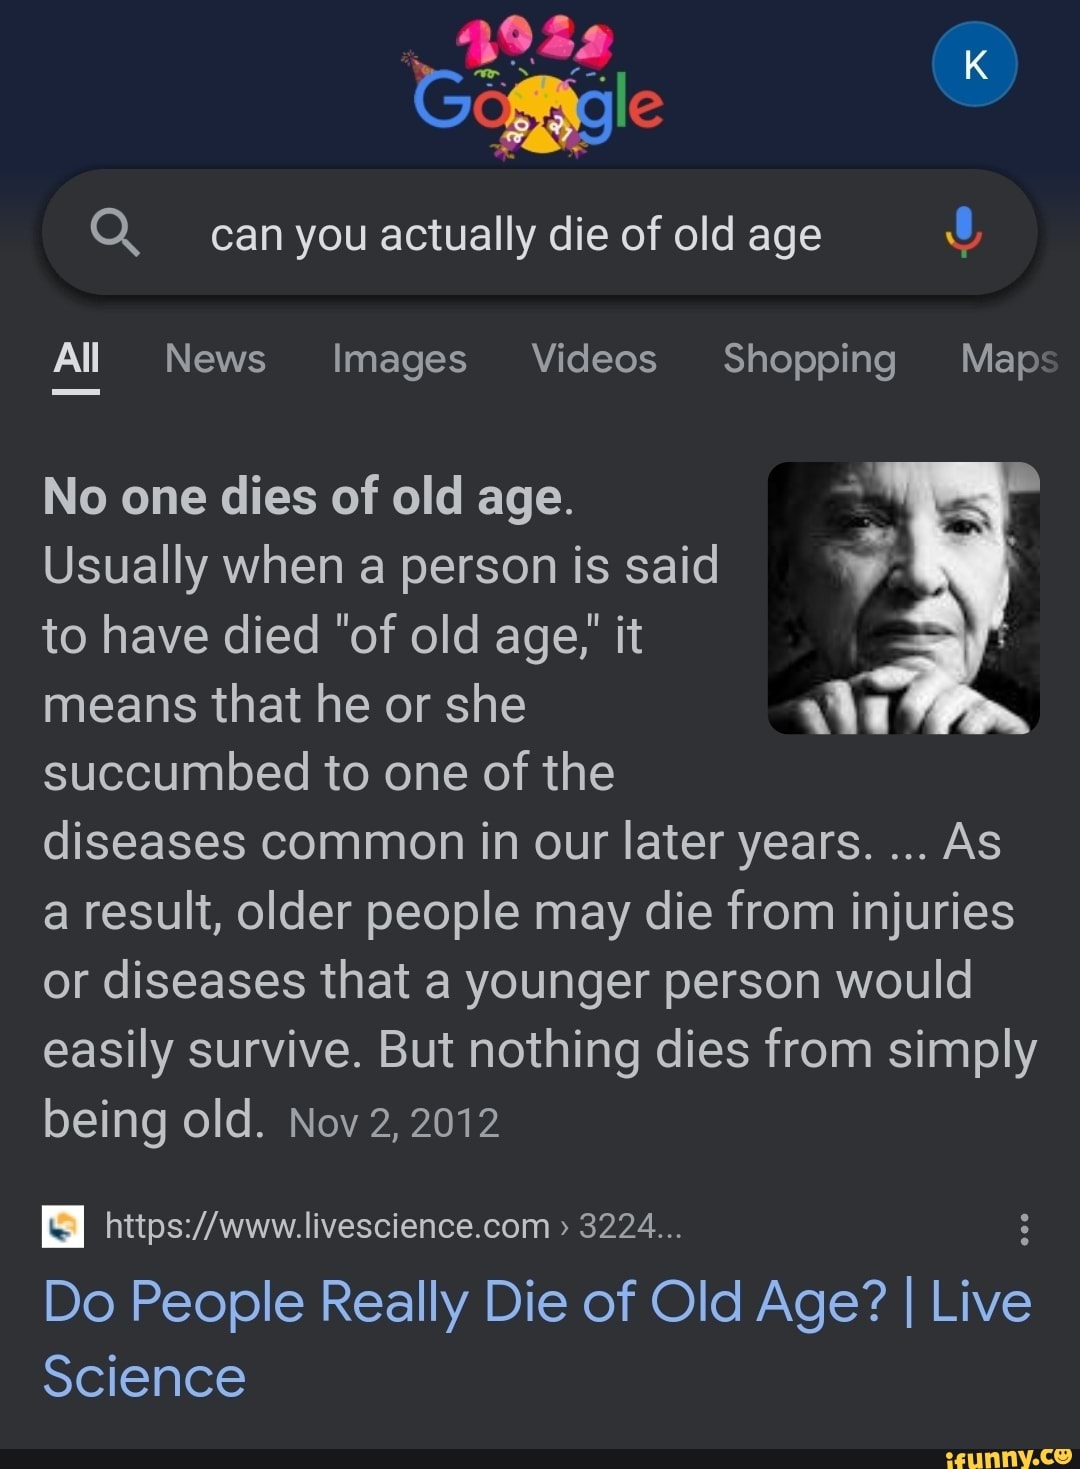 What Does It Mean to Die of Old Age?